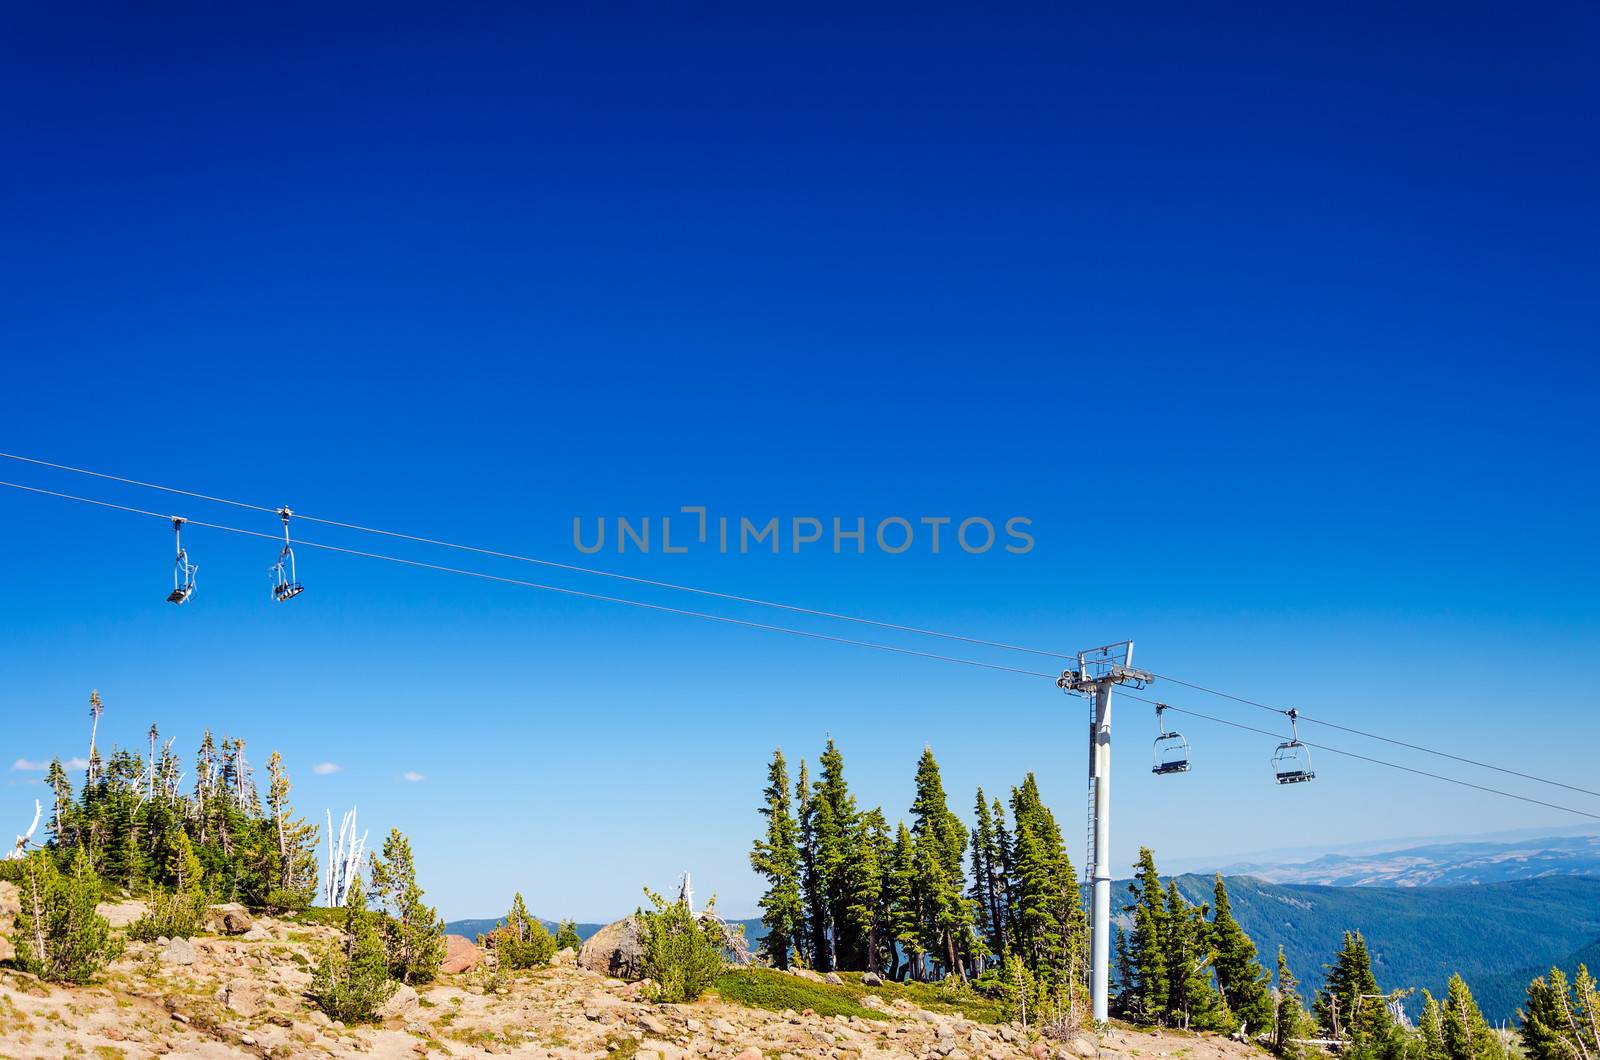 Chairlift and Trees by jkraft5